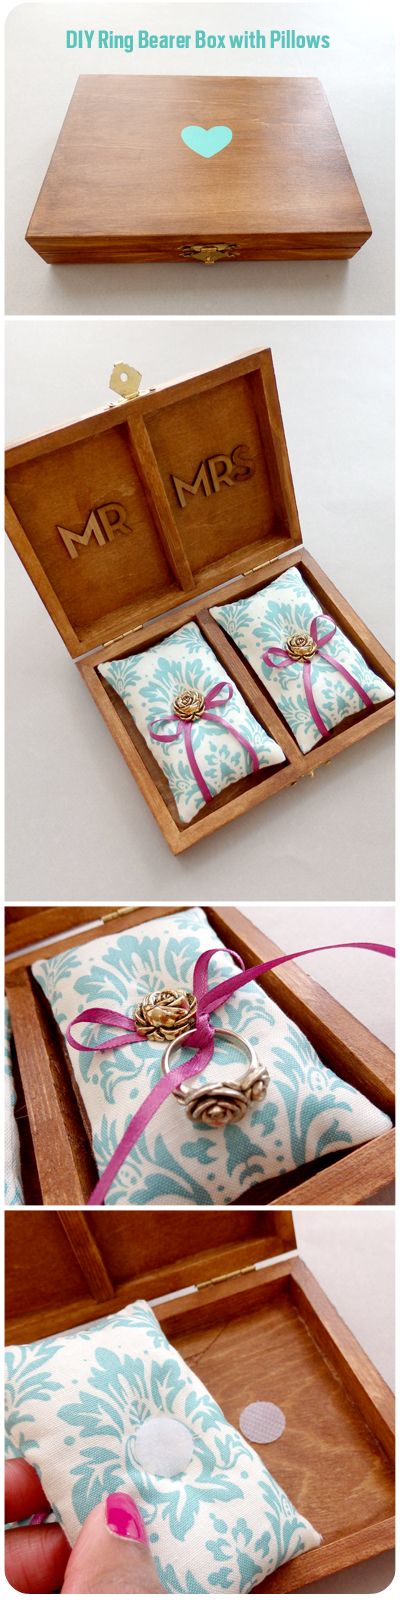 21 DIY Ring Boxes That Will Beautify and Add Romance To a Special Moment homesthetics design (2)